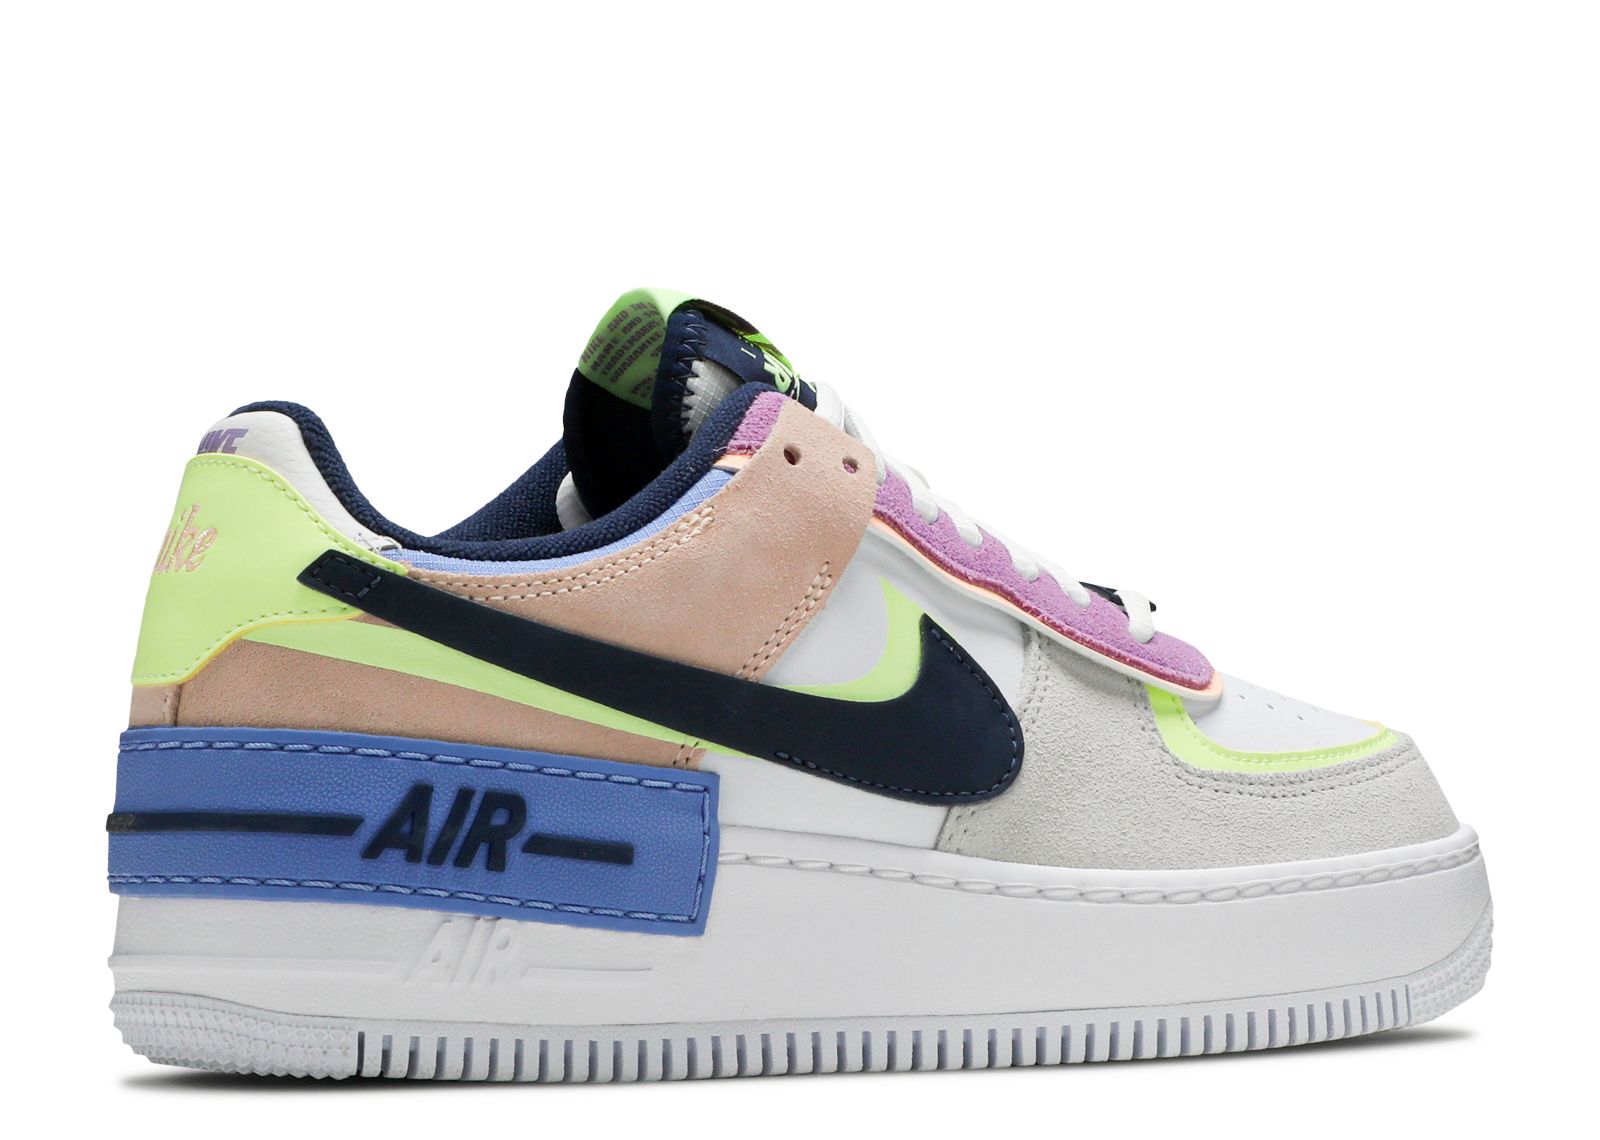 Nike Air Force 1 Low Shadow Summit White Barely Volt Crimson Tint